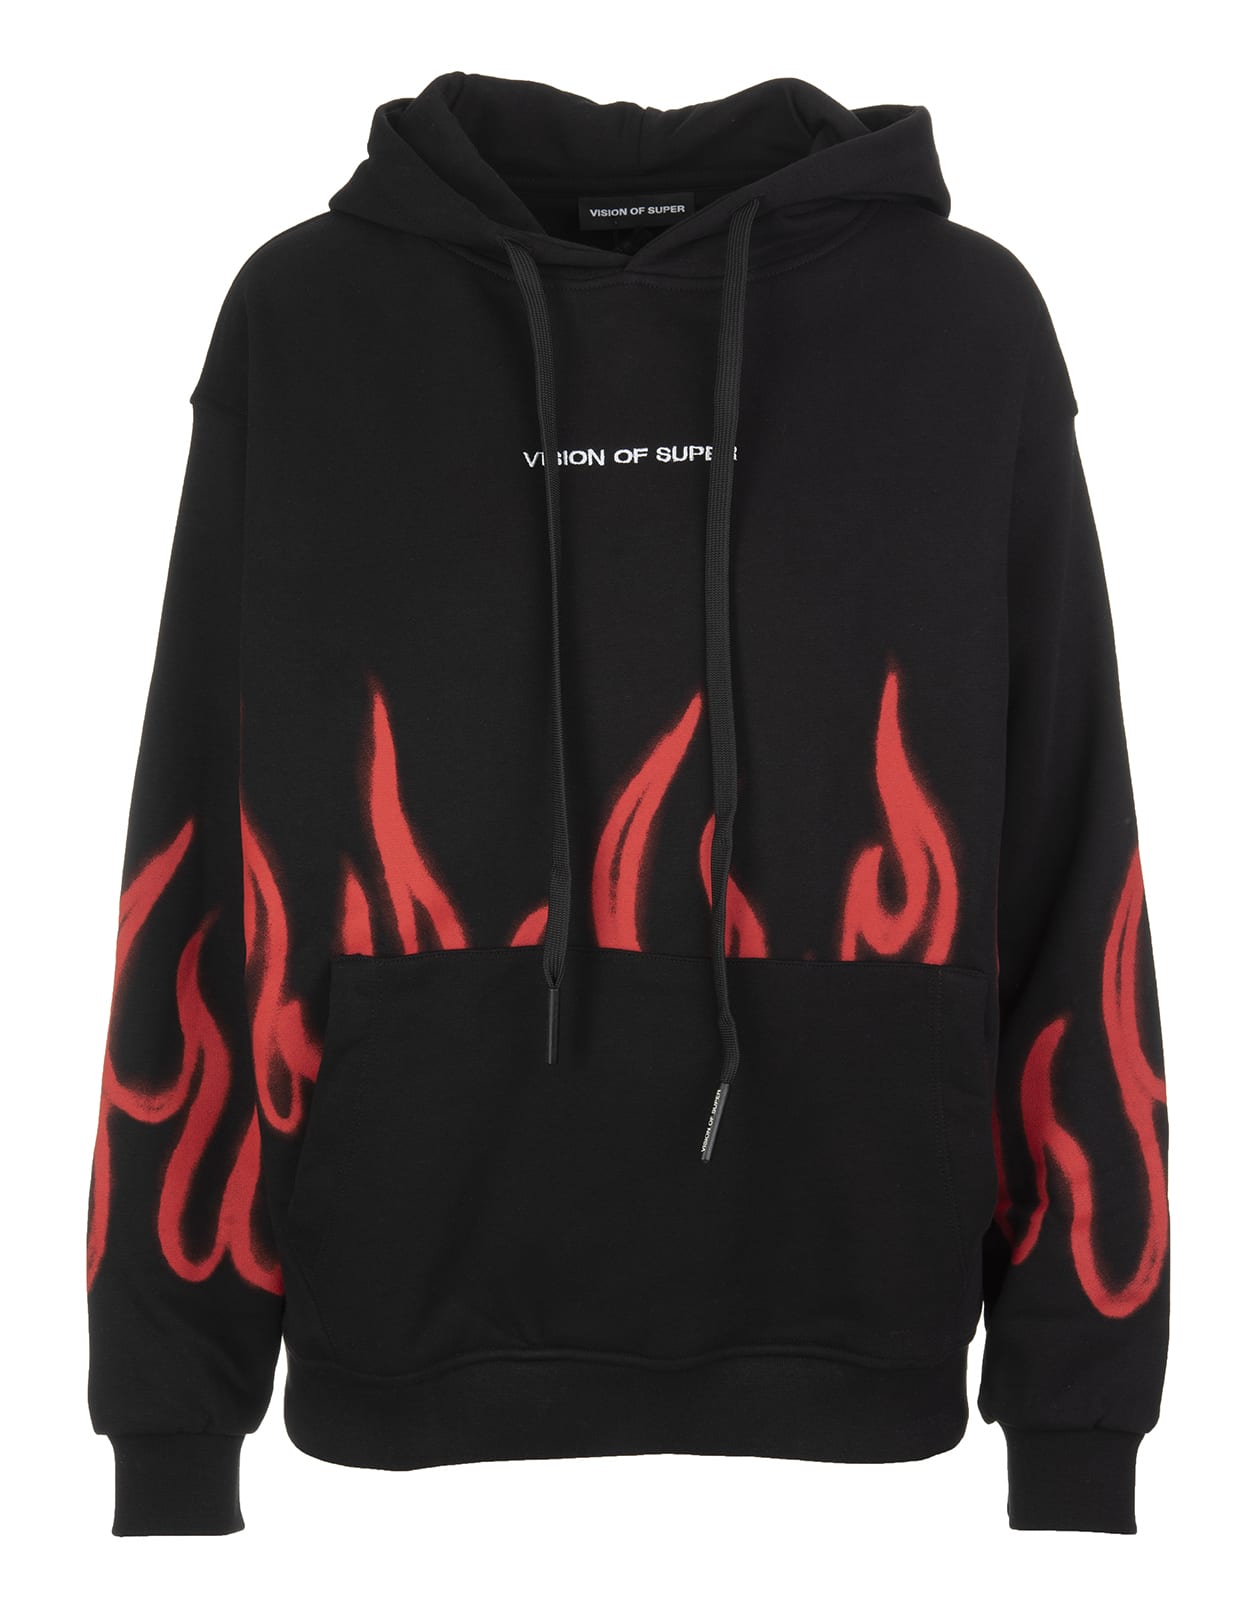 Vision of Super Unisex Black Hoodie With Red Spray Flames Print